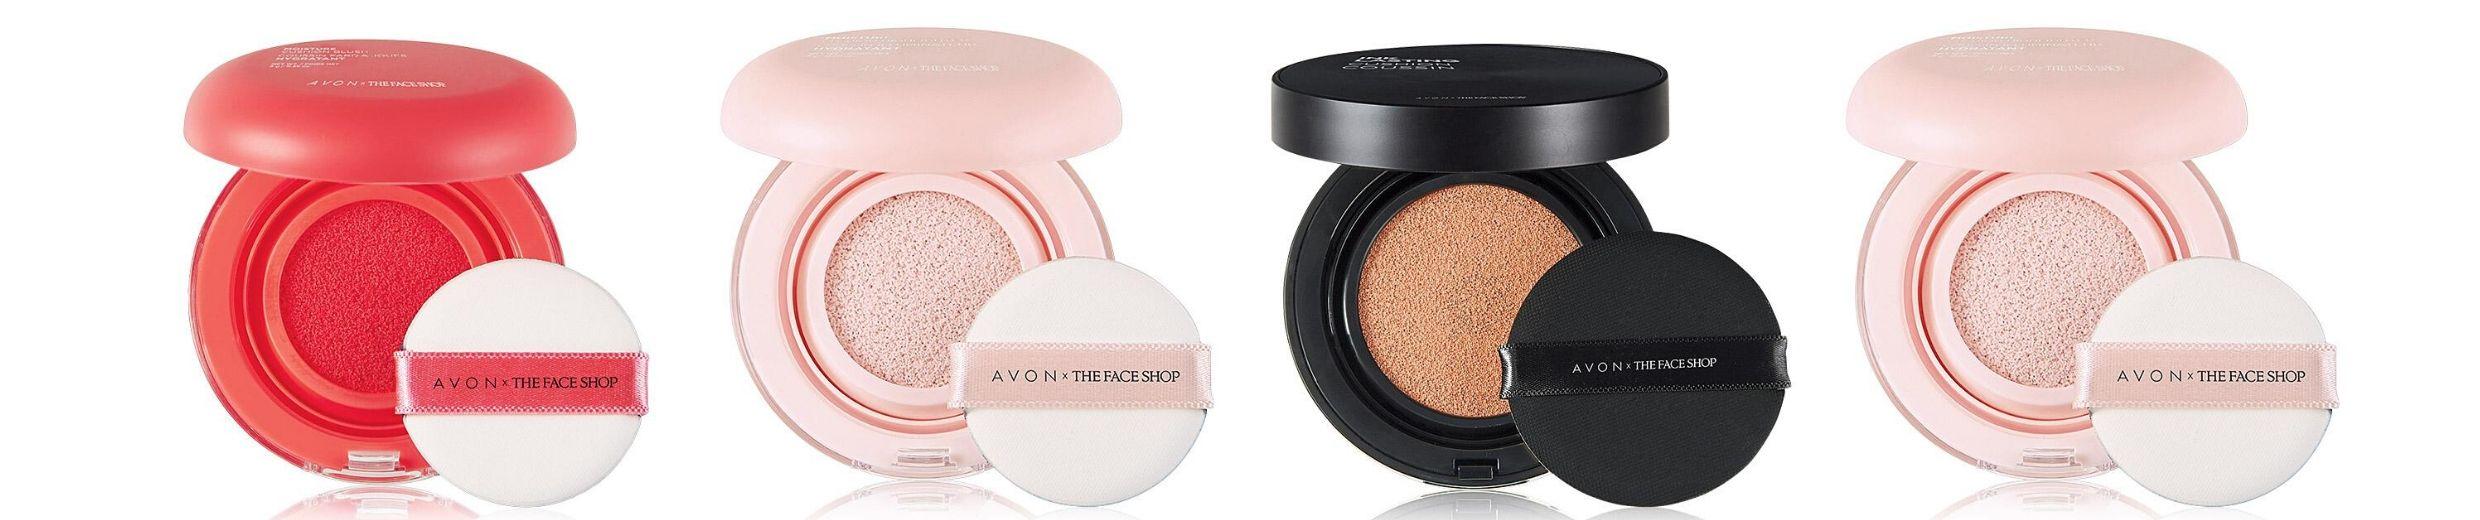 Avon Just Launched a New Collab with The Face Shop & It’s Everything